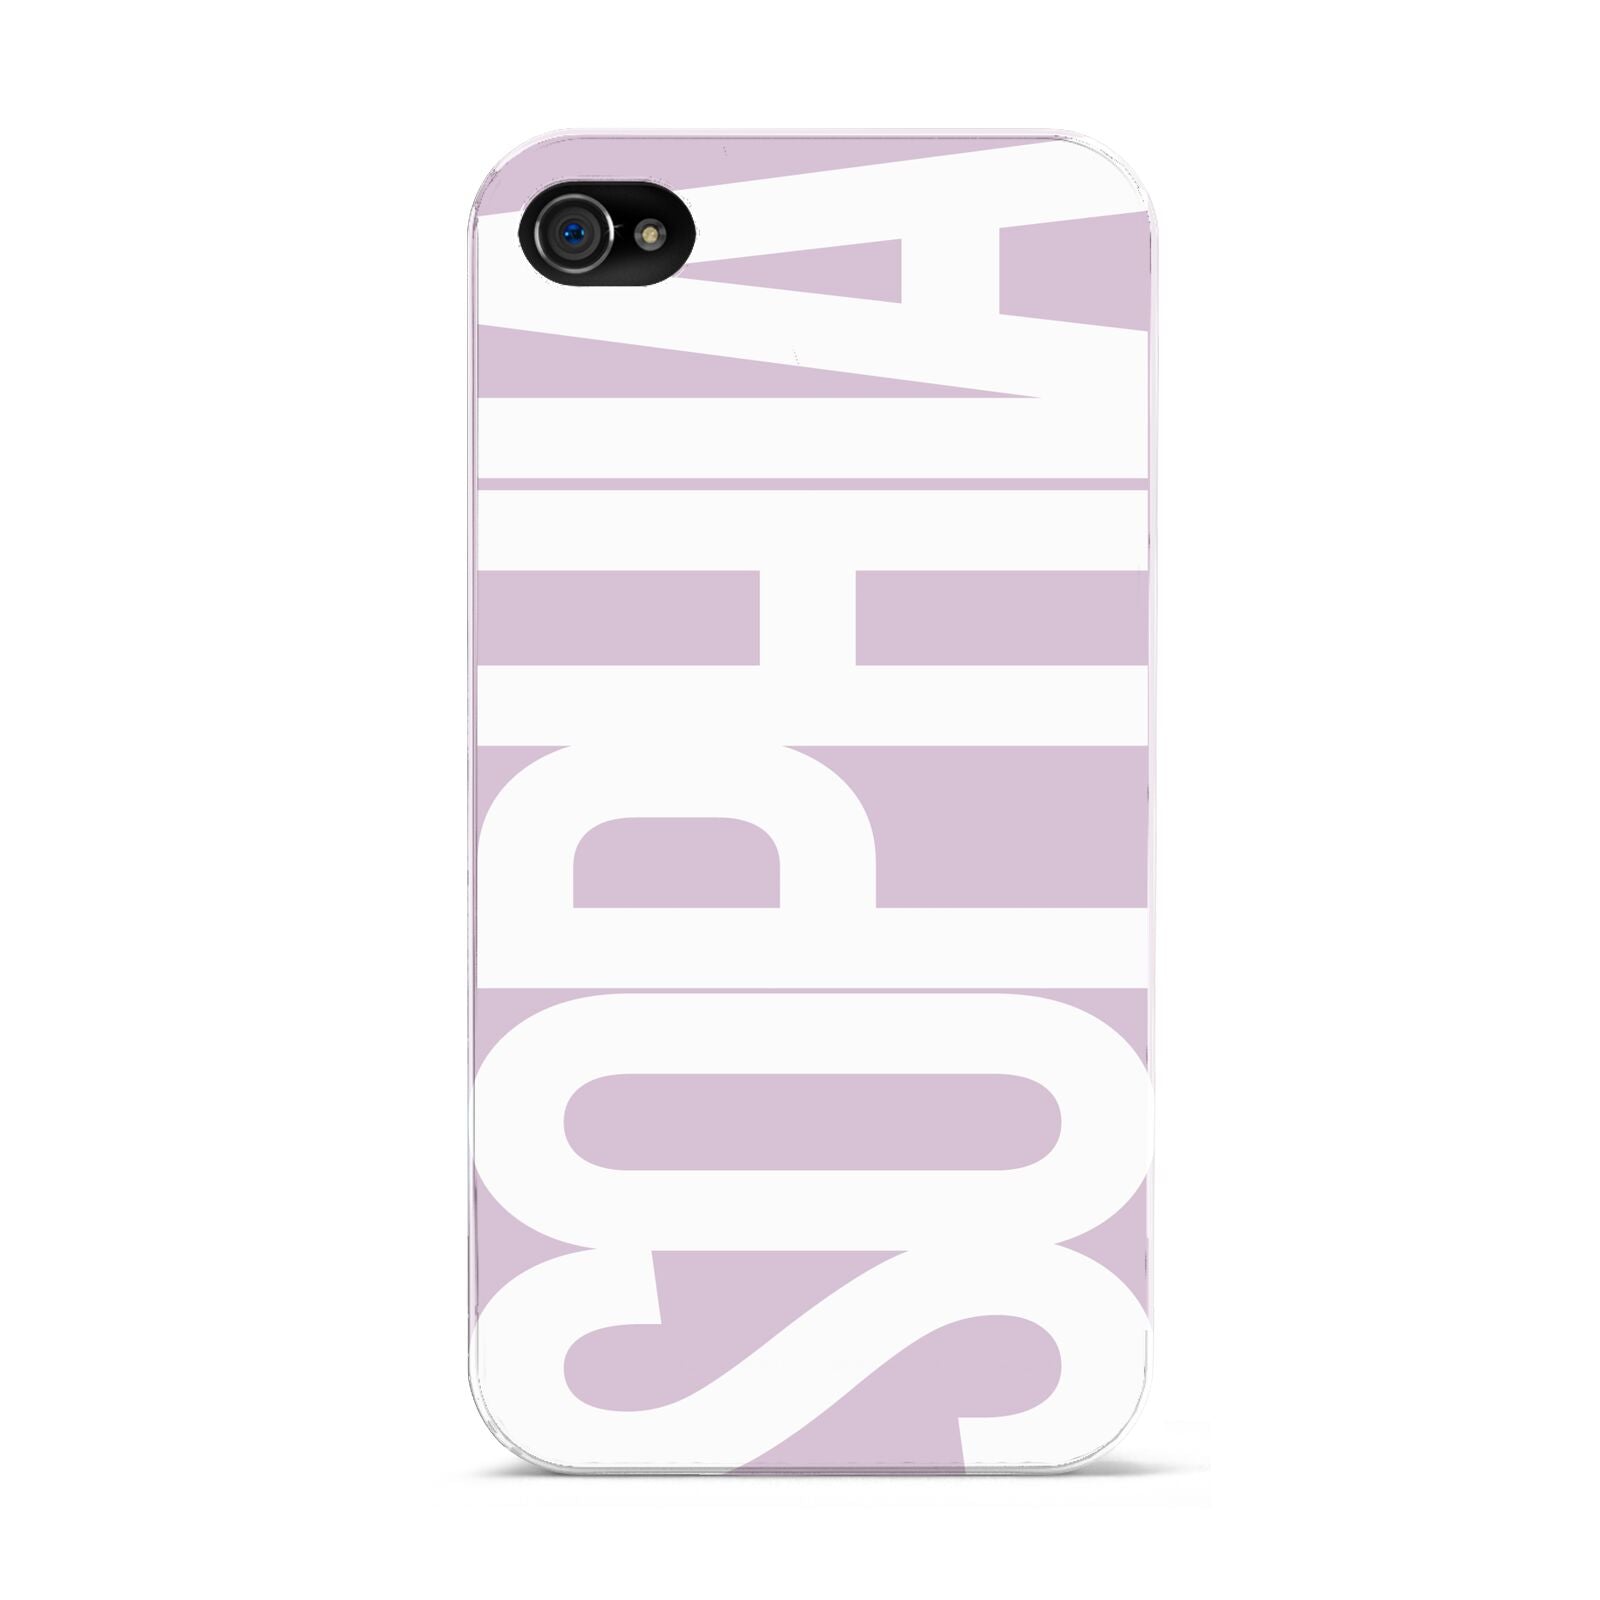 Dusty Pink with Bold White Text Apple iPhone 4s Case